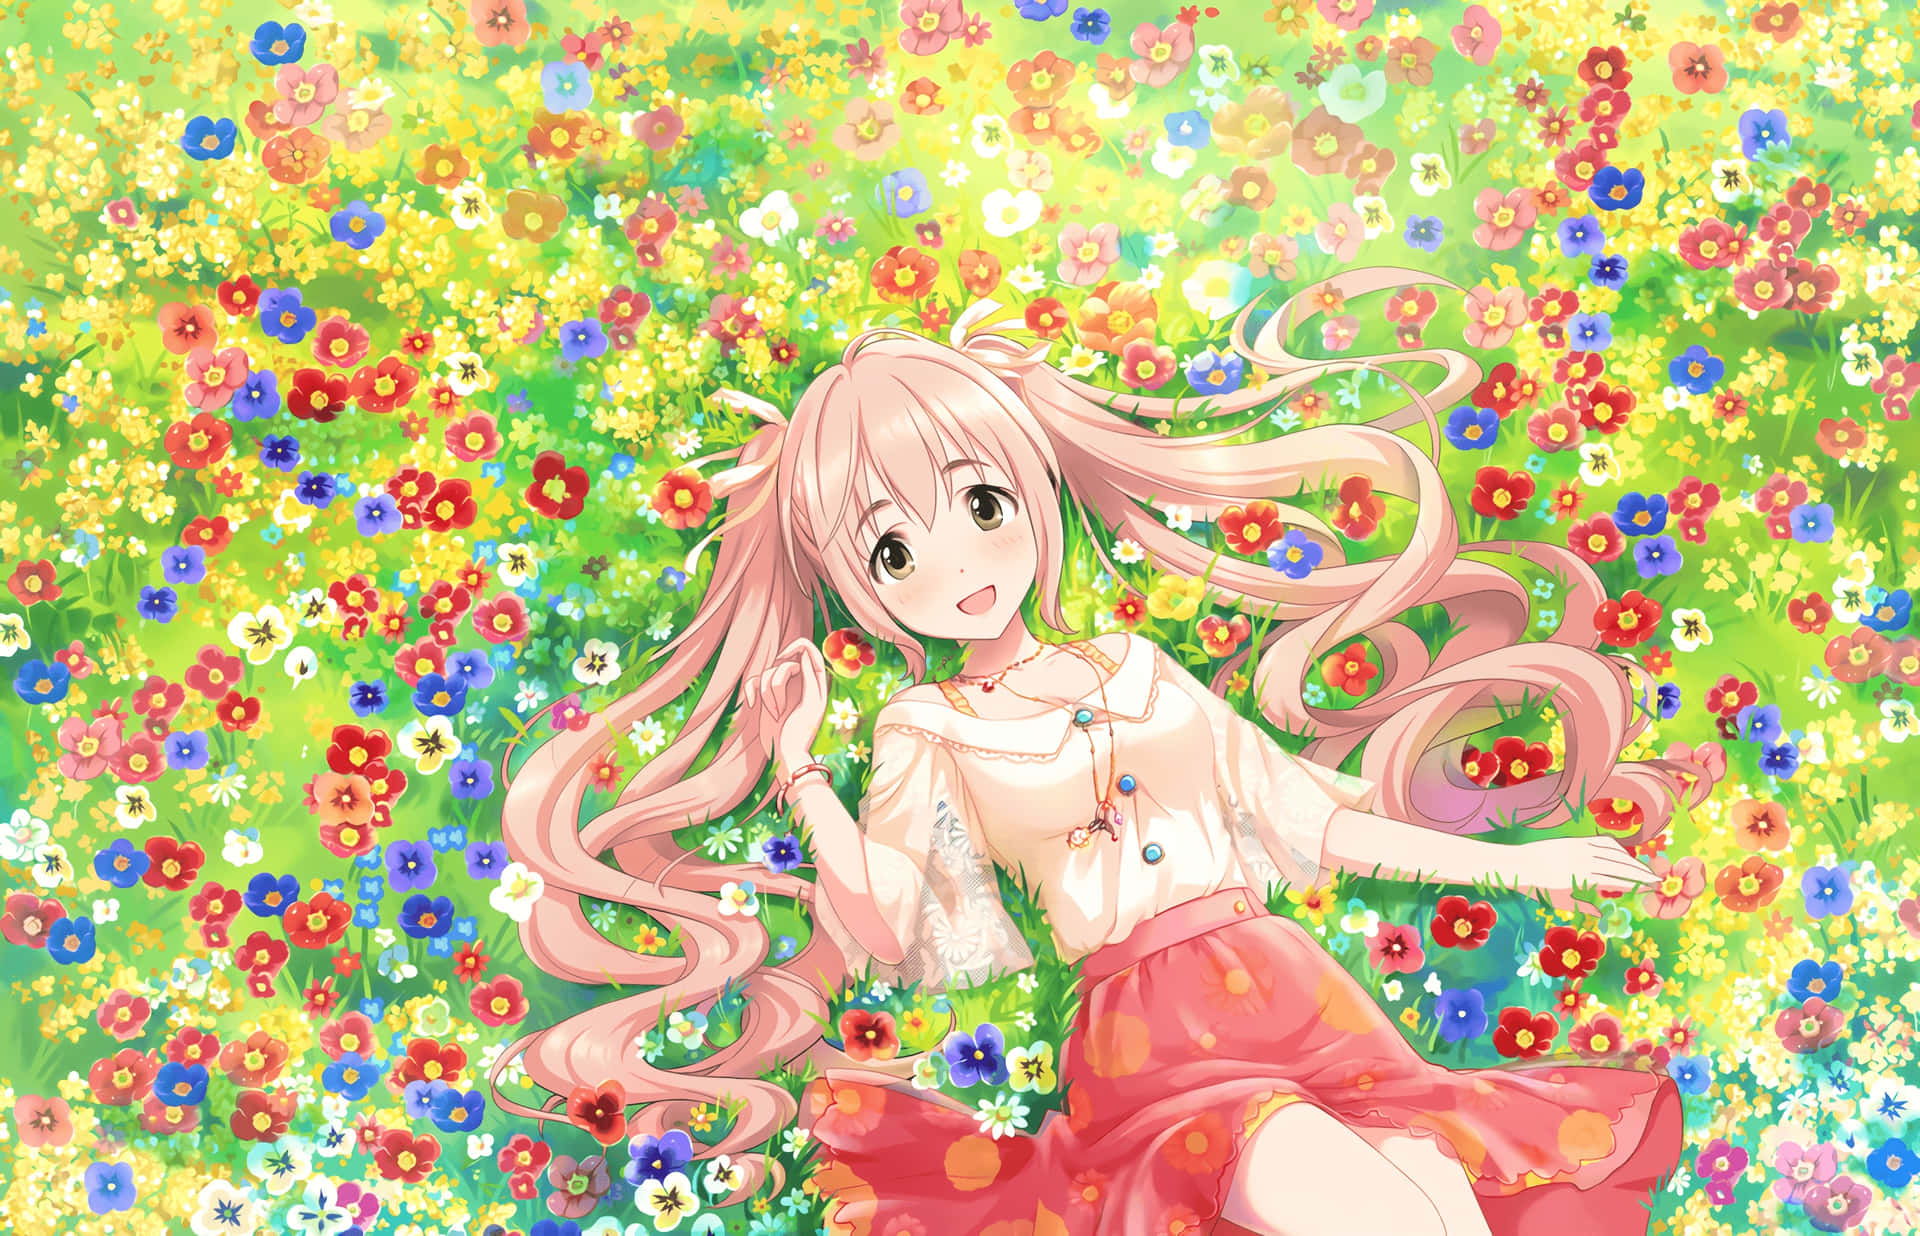 A beautiful anime girl with vibrant hair and a flower in her hair